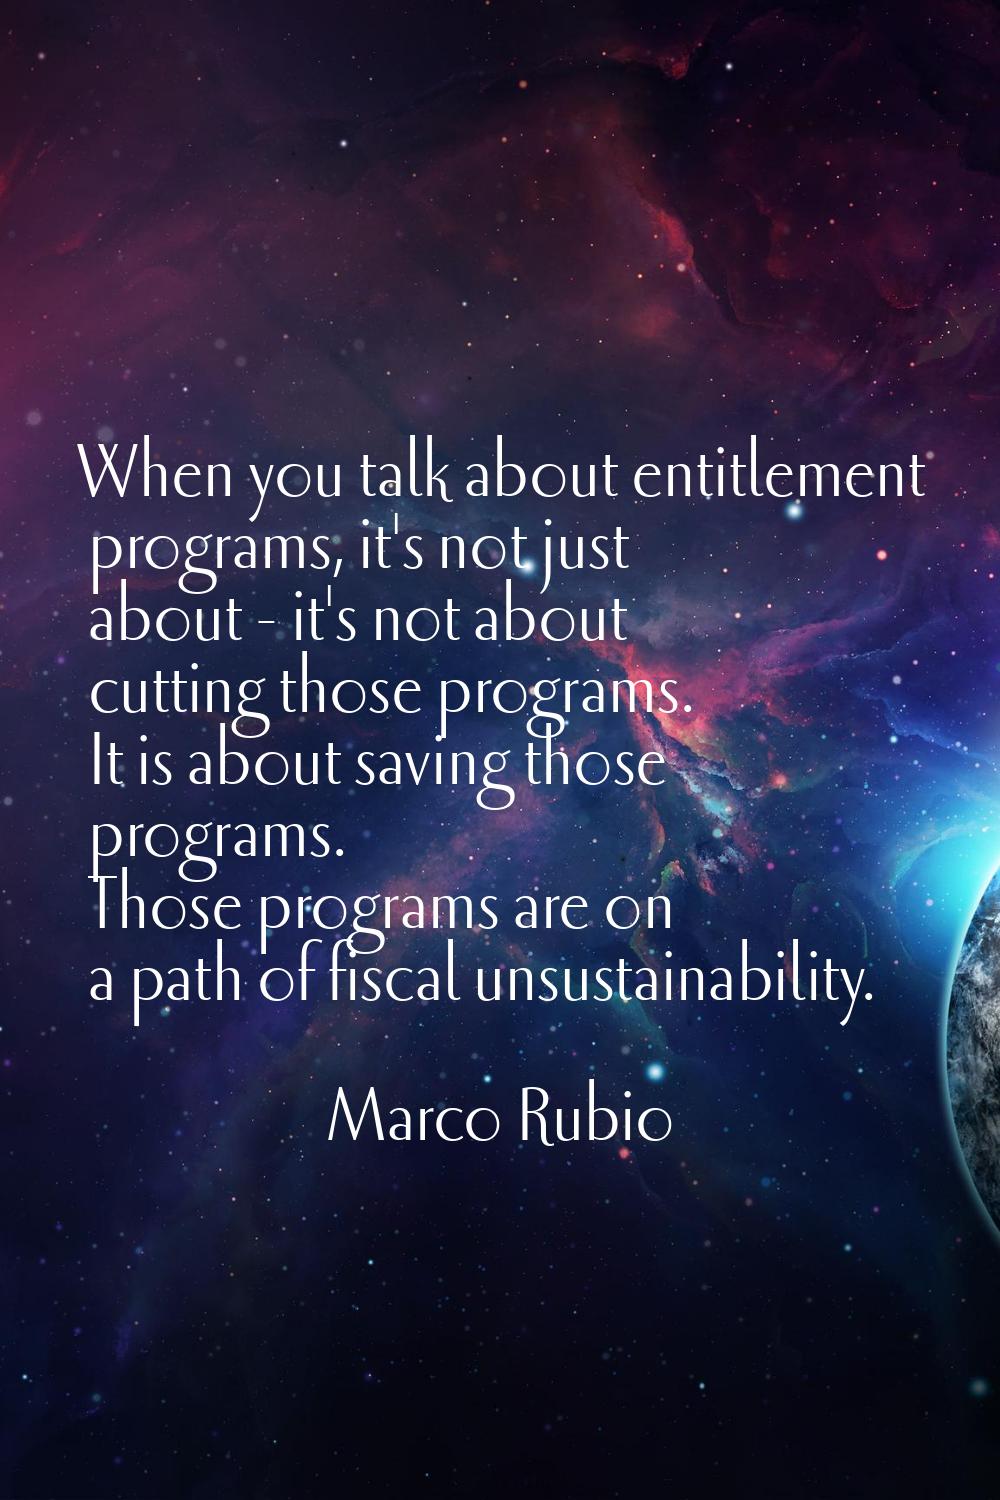 When you talk about entitlement programs, it's not just about - it's not about cutting those progra